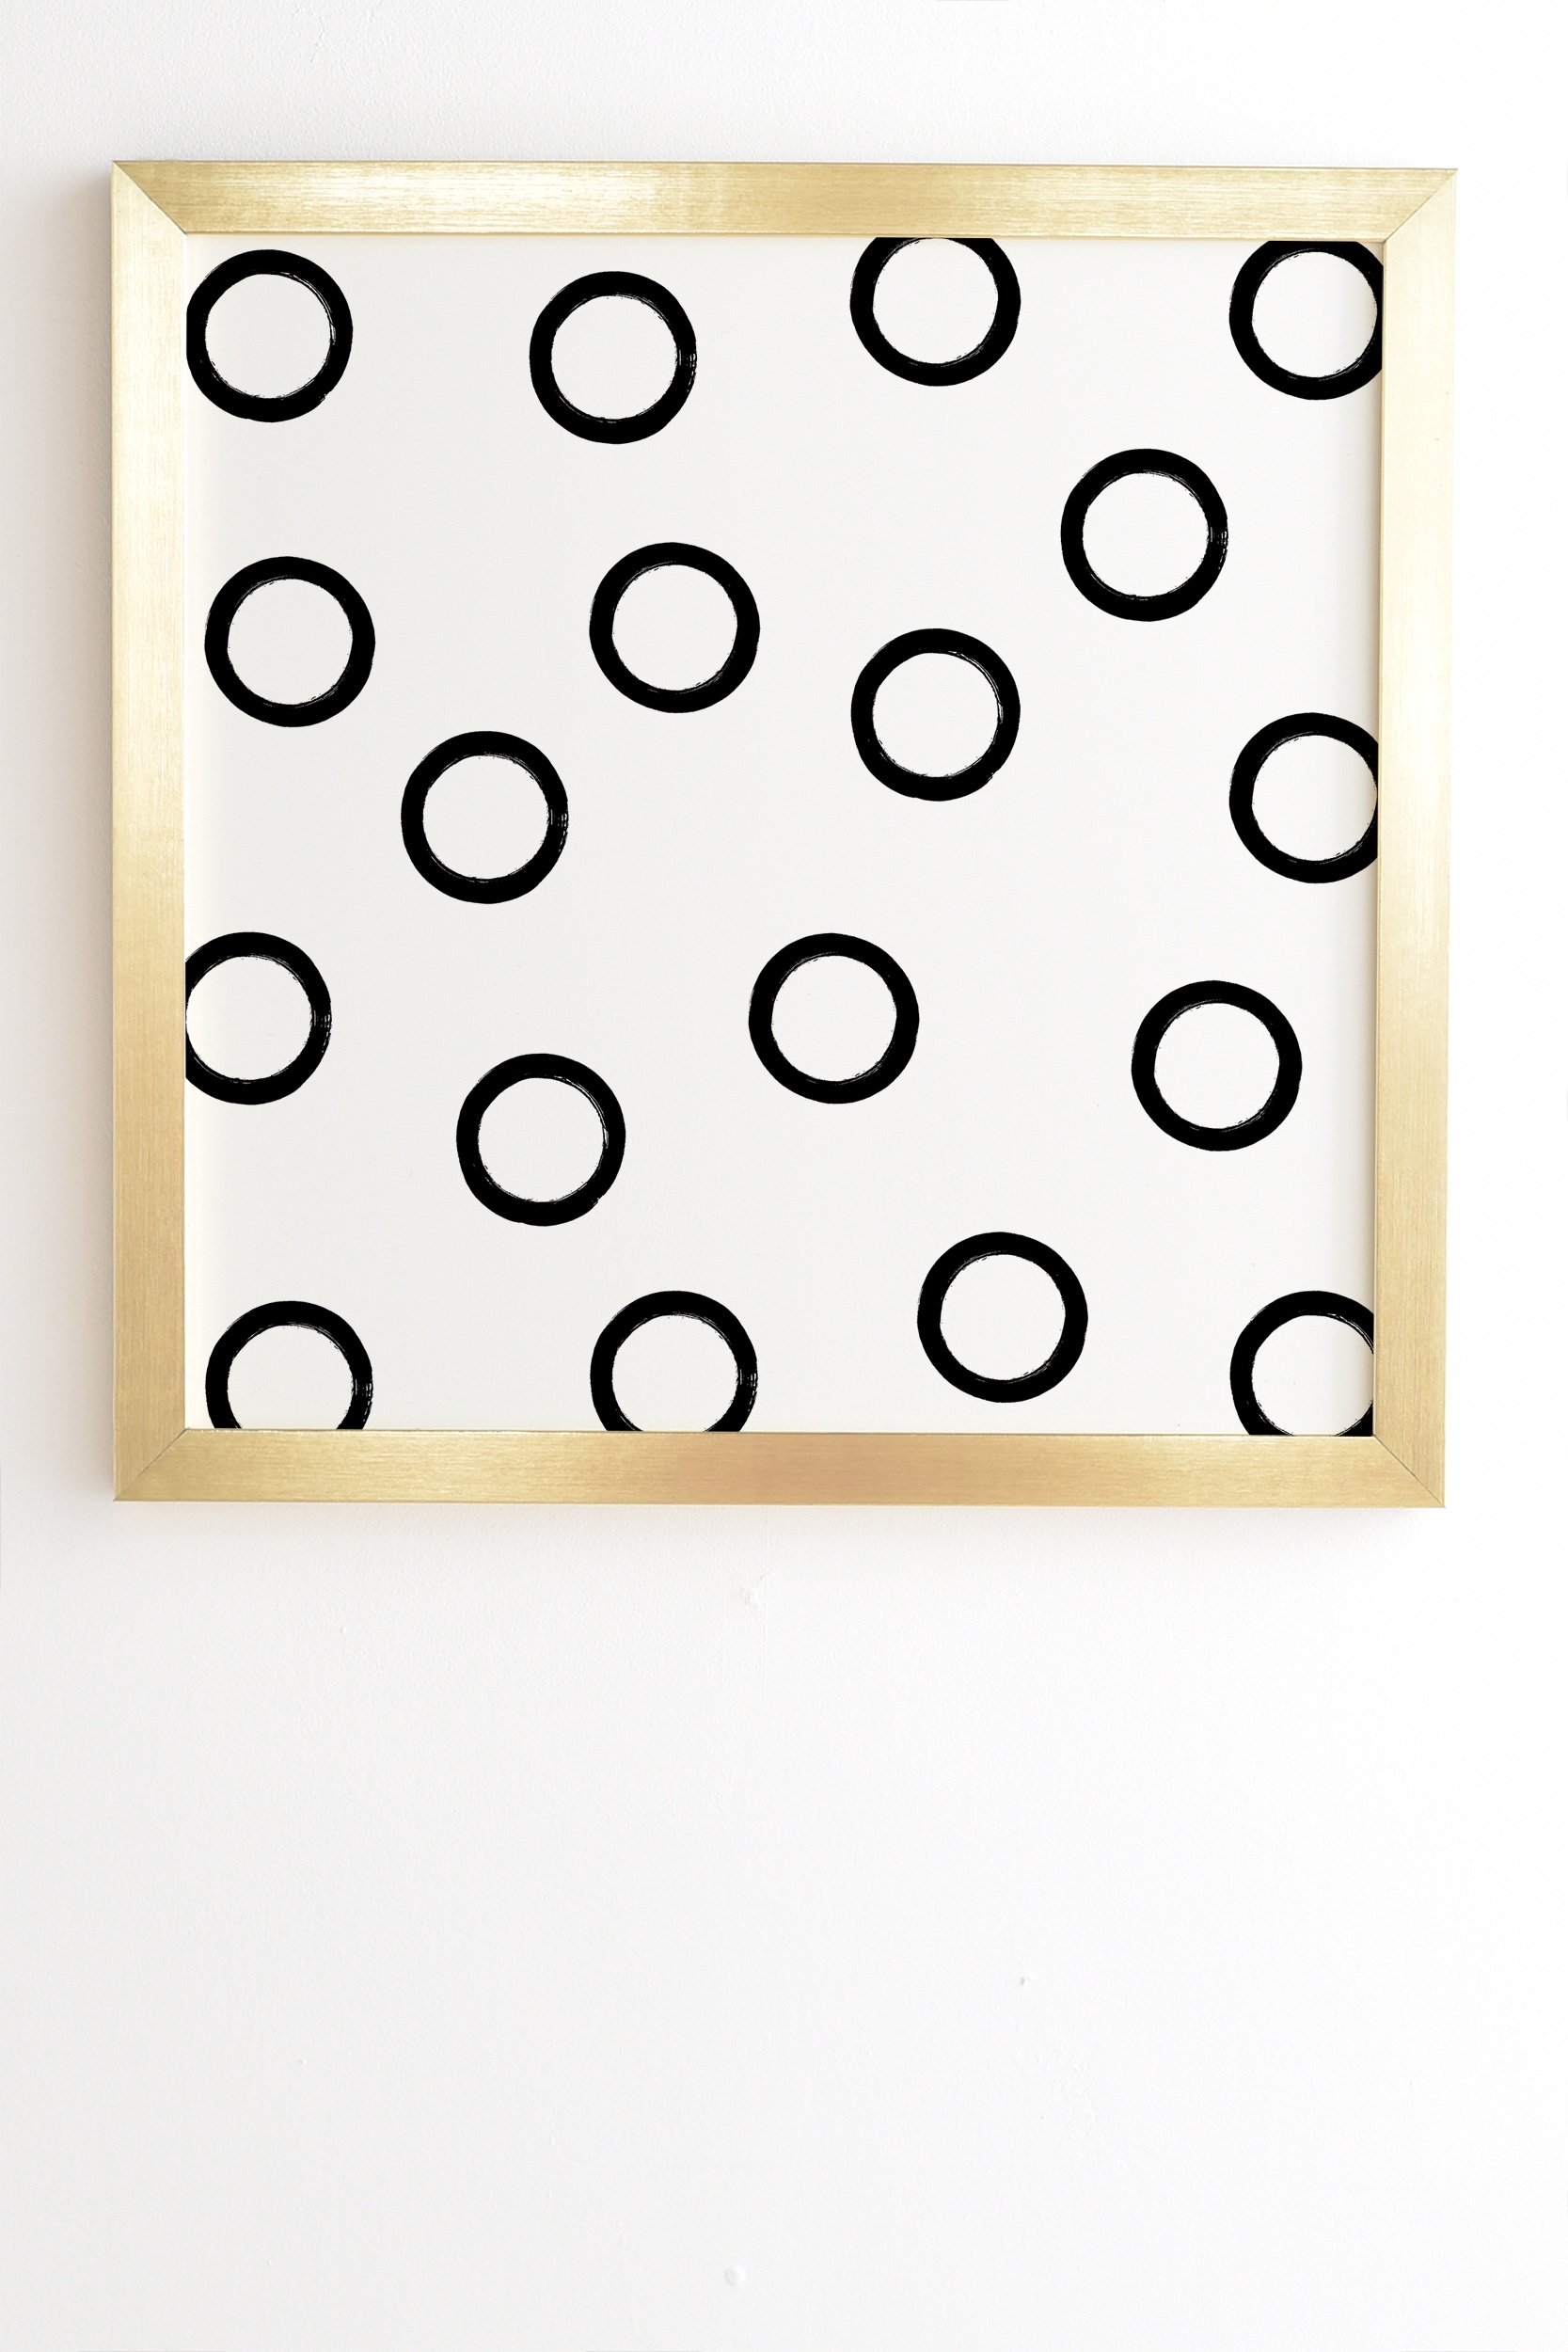 Monochrome Circles V2 by Kelly Haines - Framed Wall Art Basic Gold 11" x 13" - Image 1